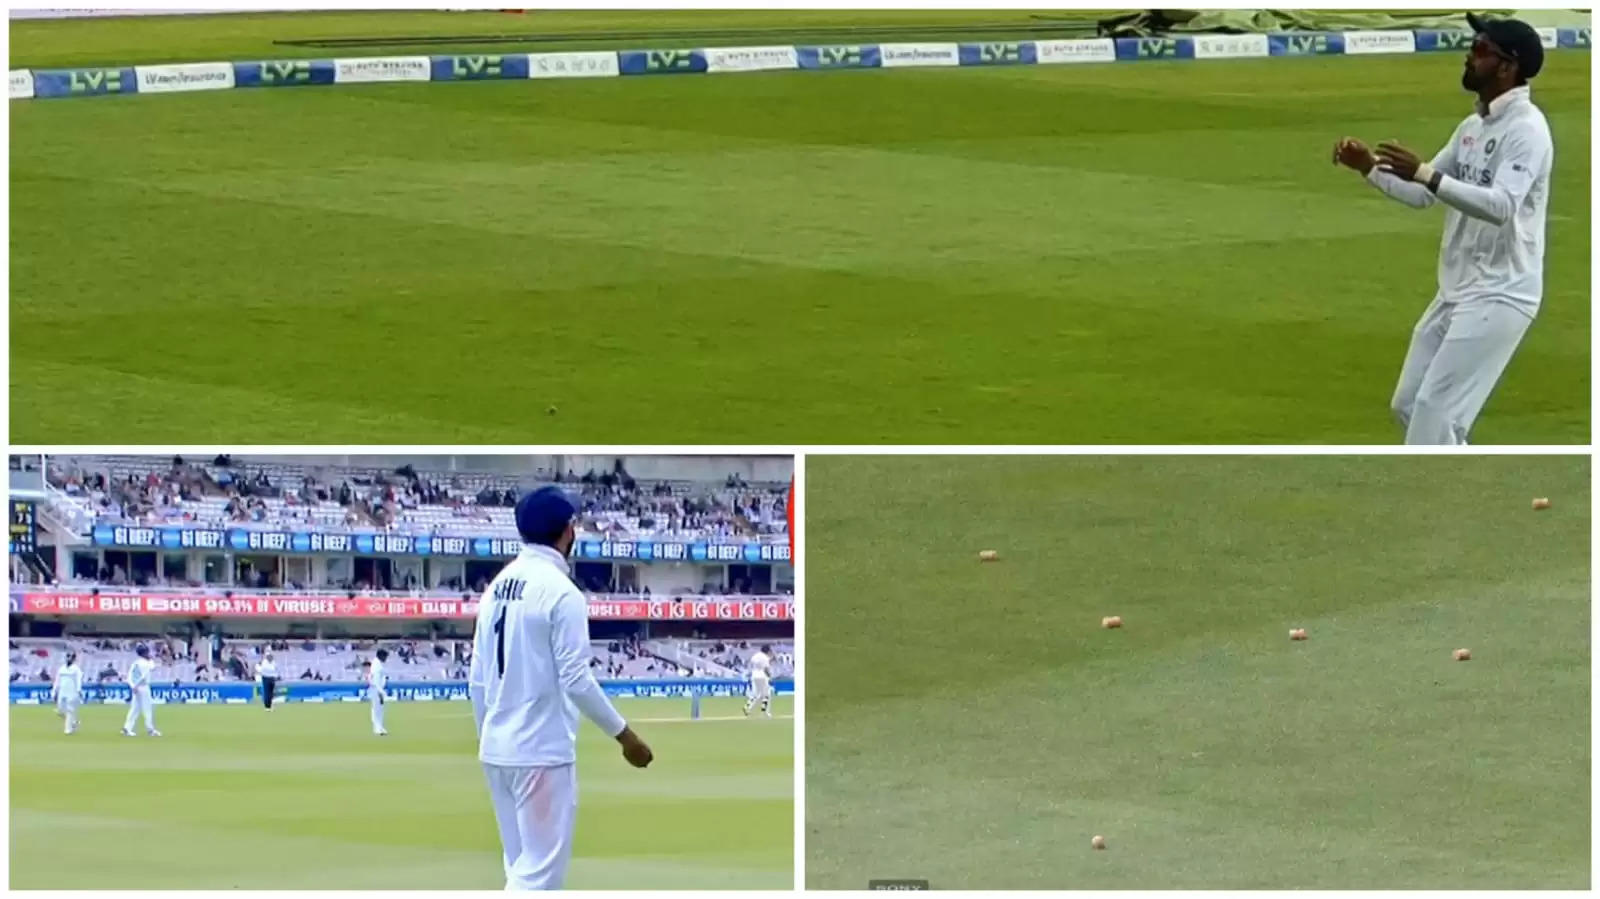 Indians left fuming after Lord’s crowd throws wine cork at KL Rahul